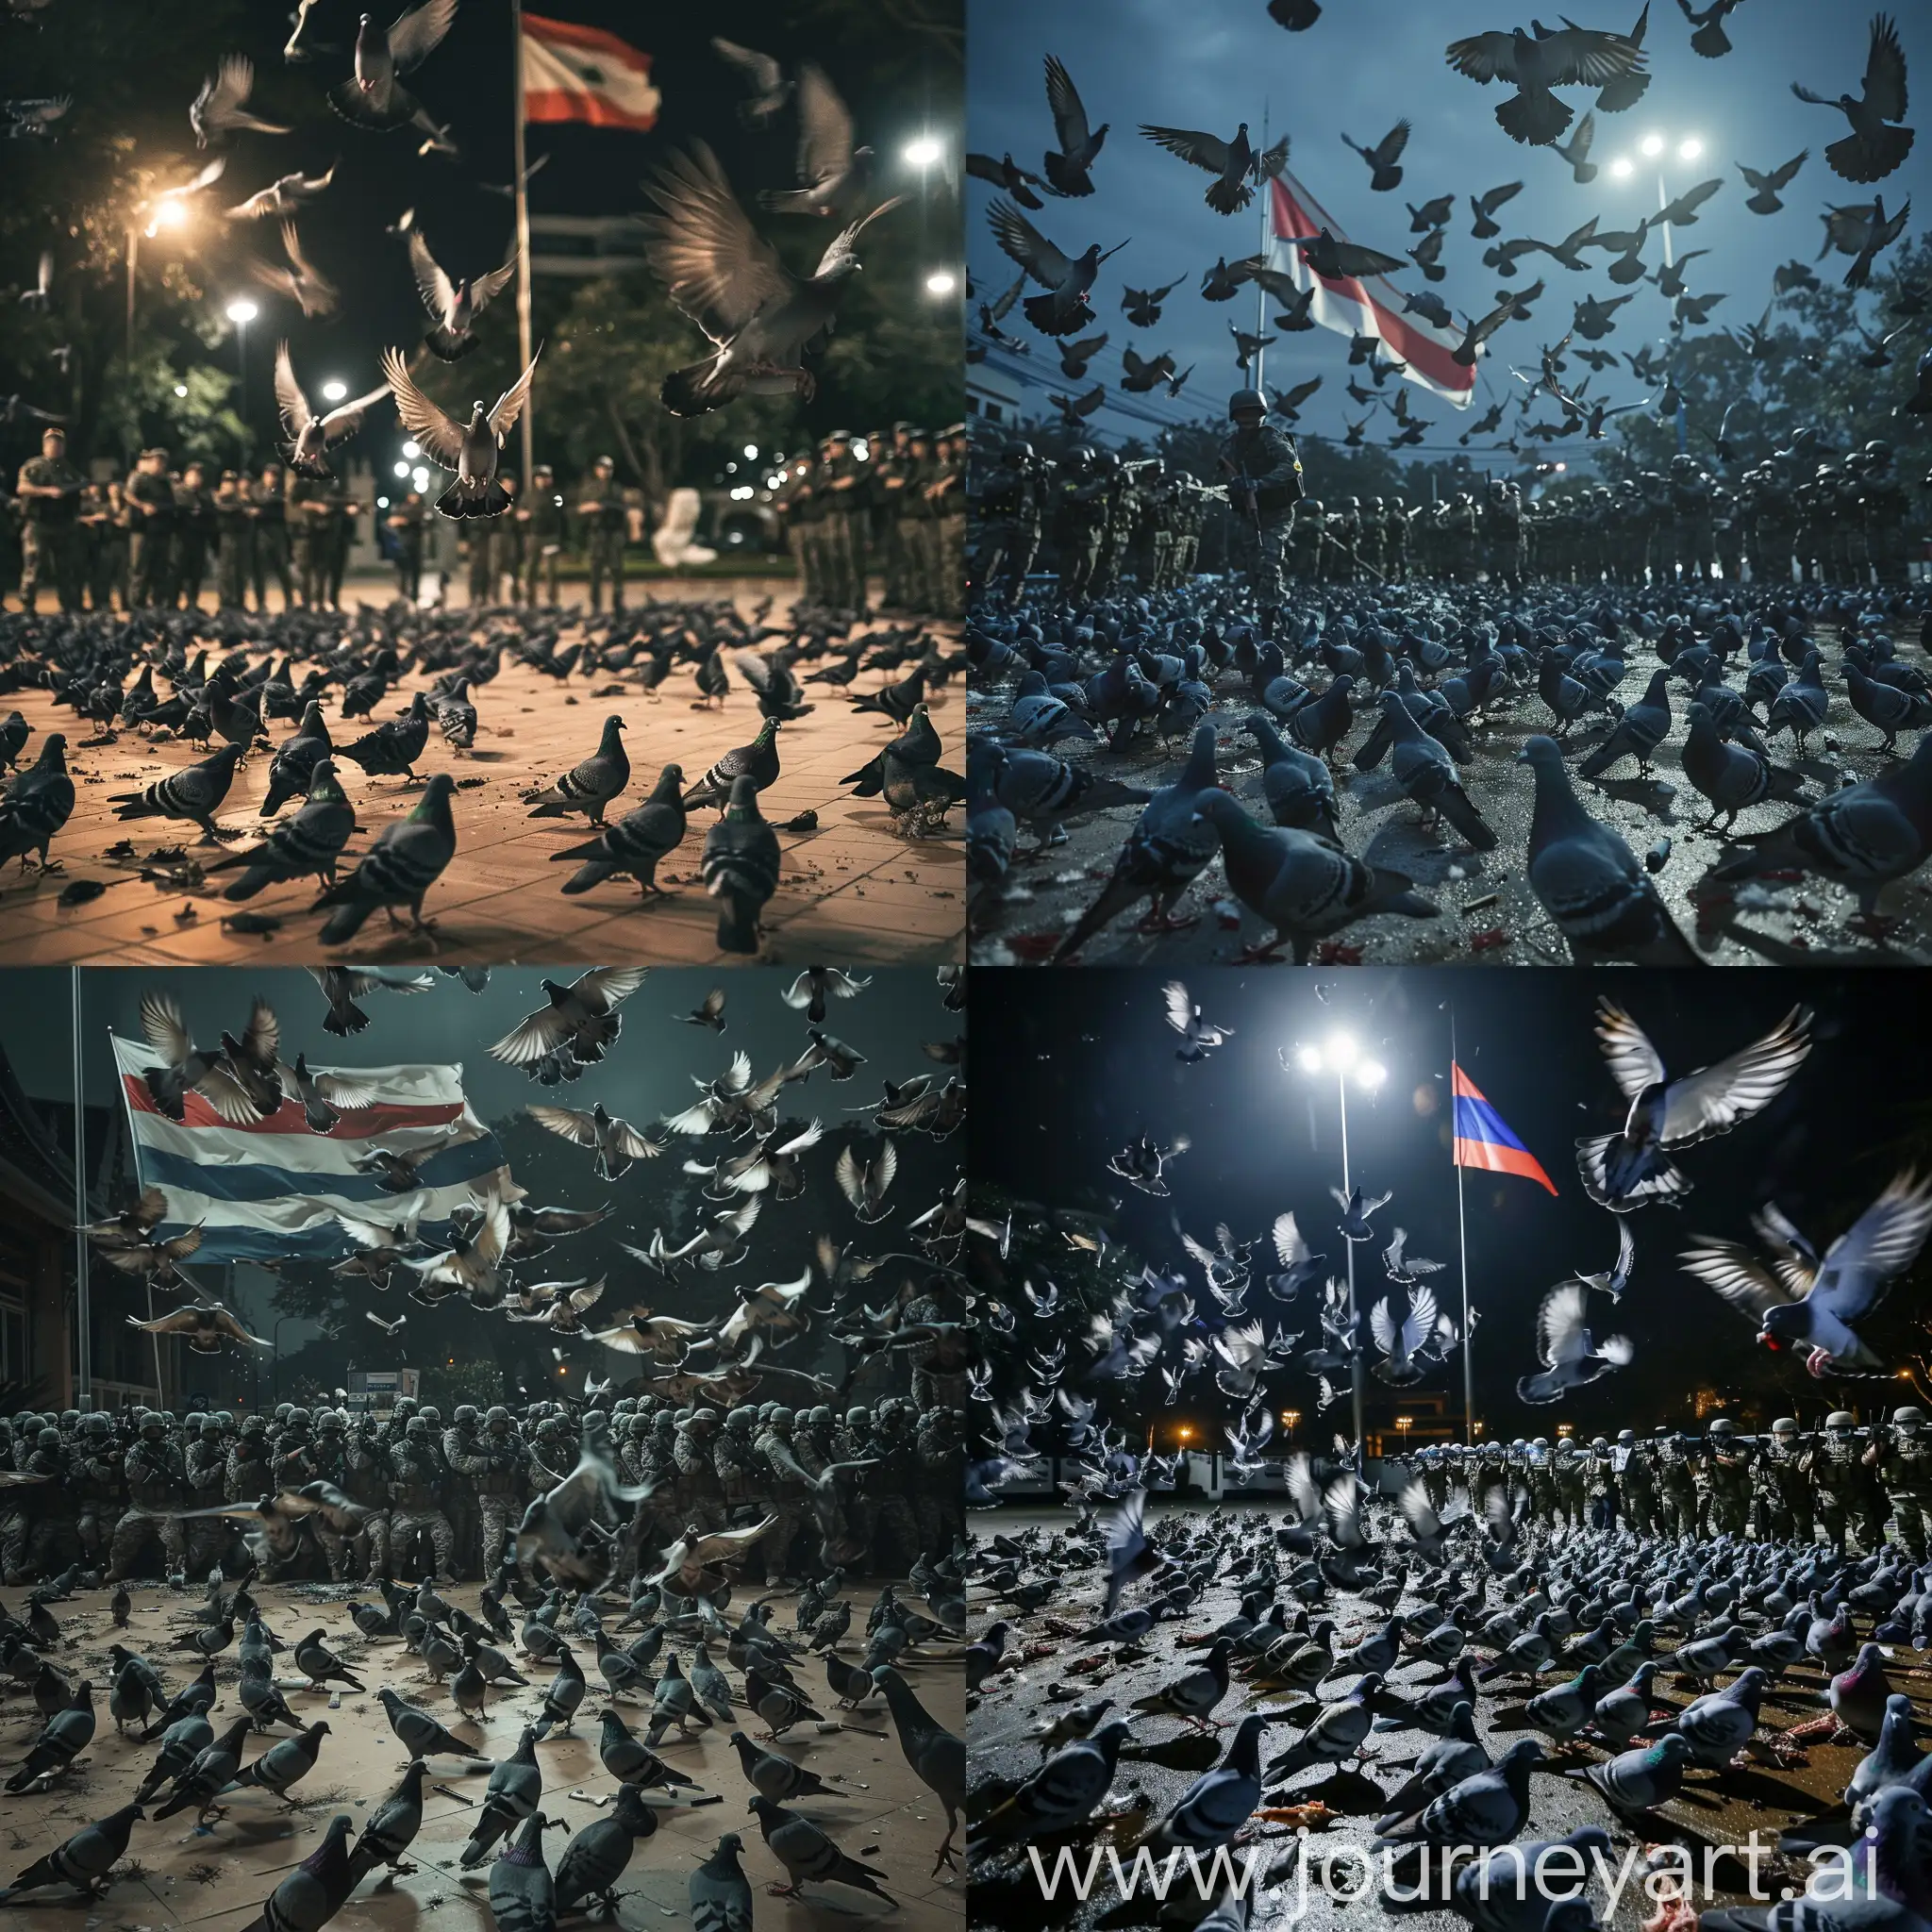 Thai-Soldiers-and-Police-Pointing-Guns-at-Flocks-of-Pigeons-in-University-Grounds